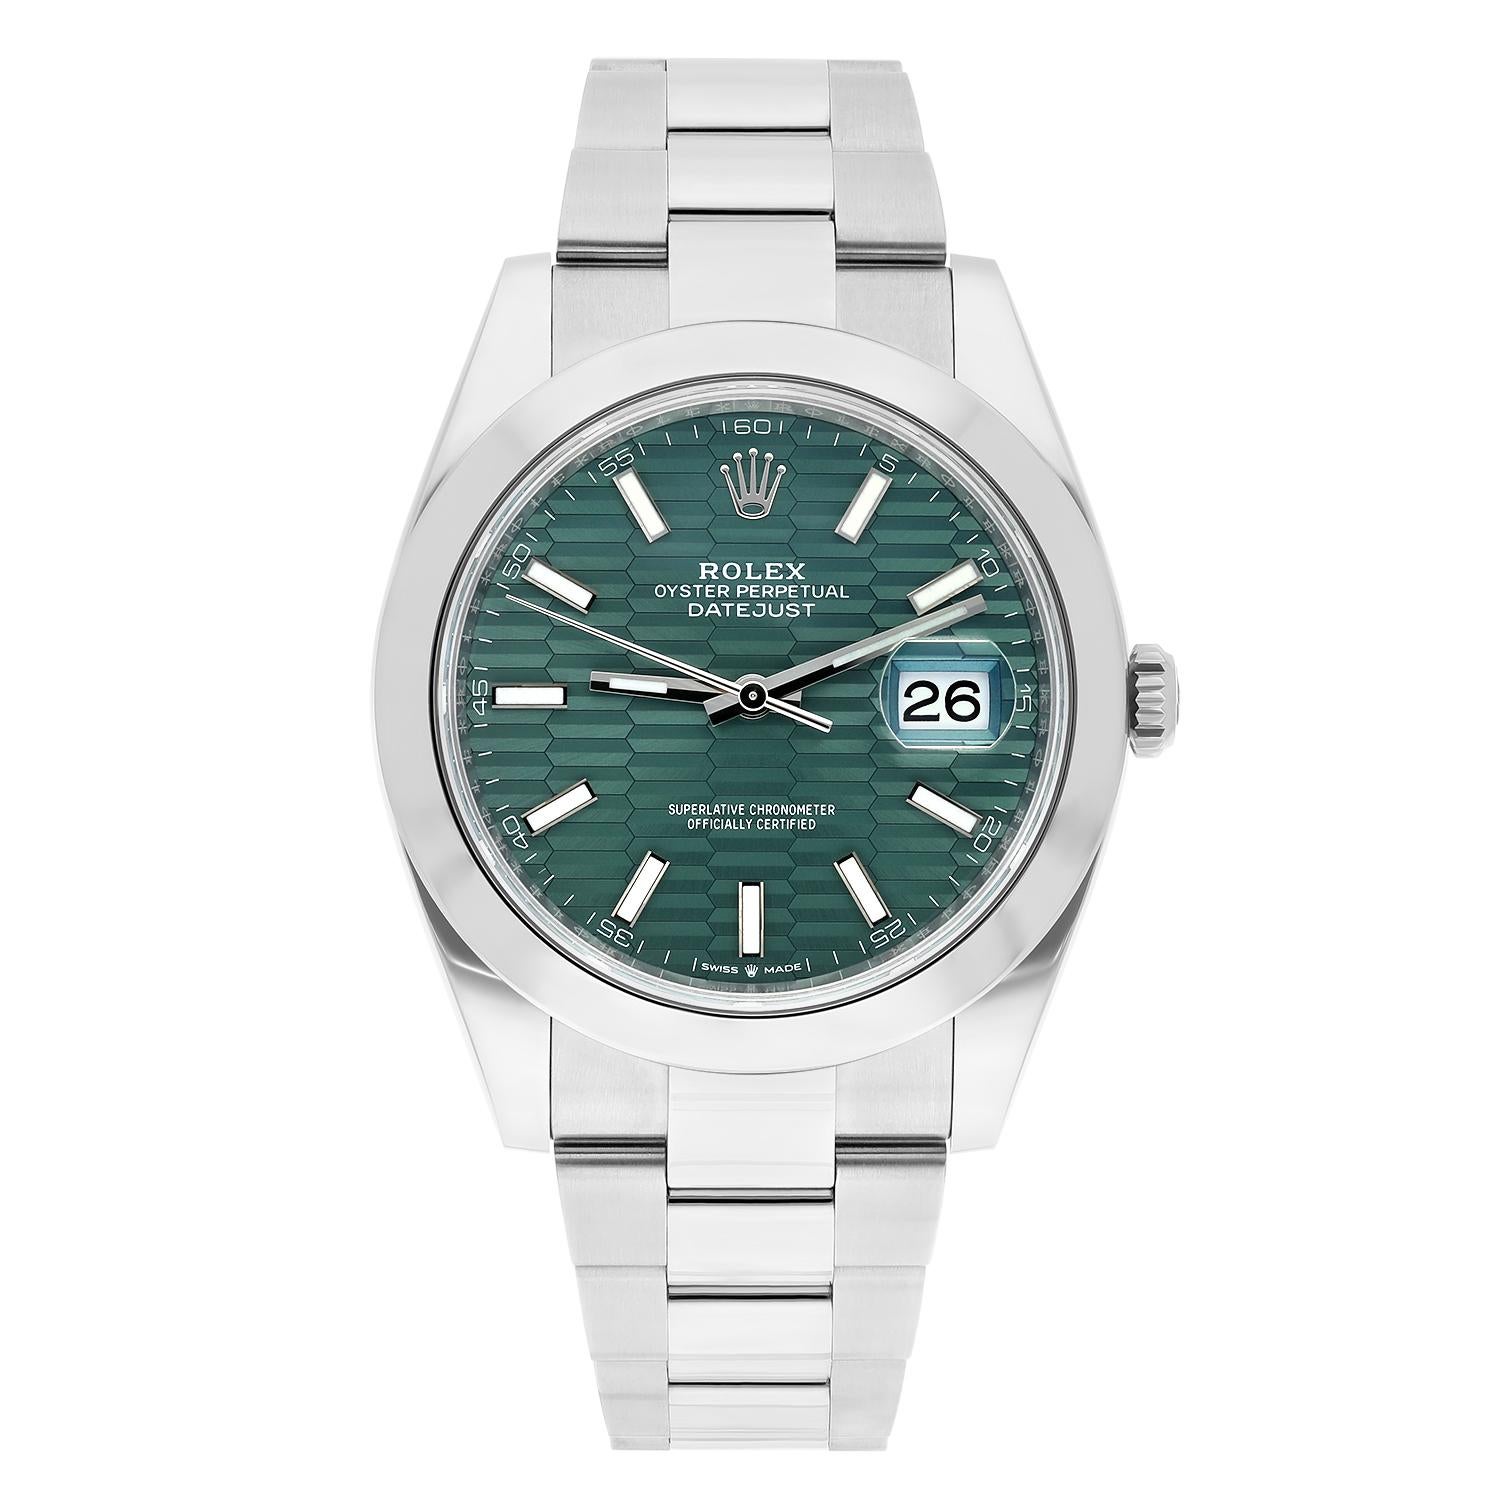 Rolex Datejust 41 Steel Green Motif Index Dial Mens Oyster Watch Unworn 126300

Sale comes with a Rolex box and Rolex papers. Manufacturer's warranty is valid until February 2028.